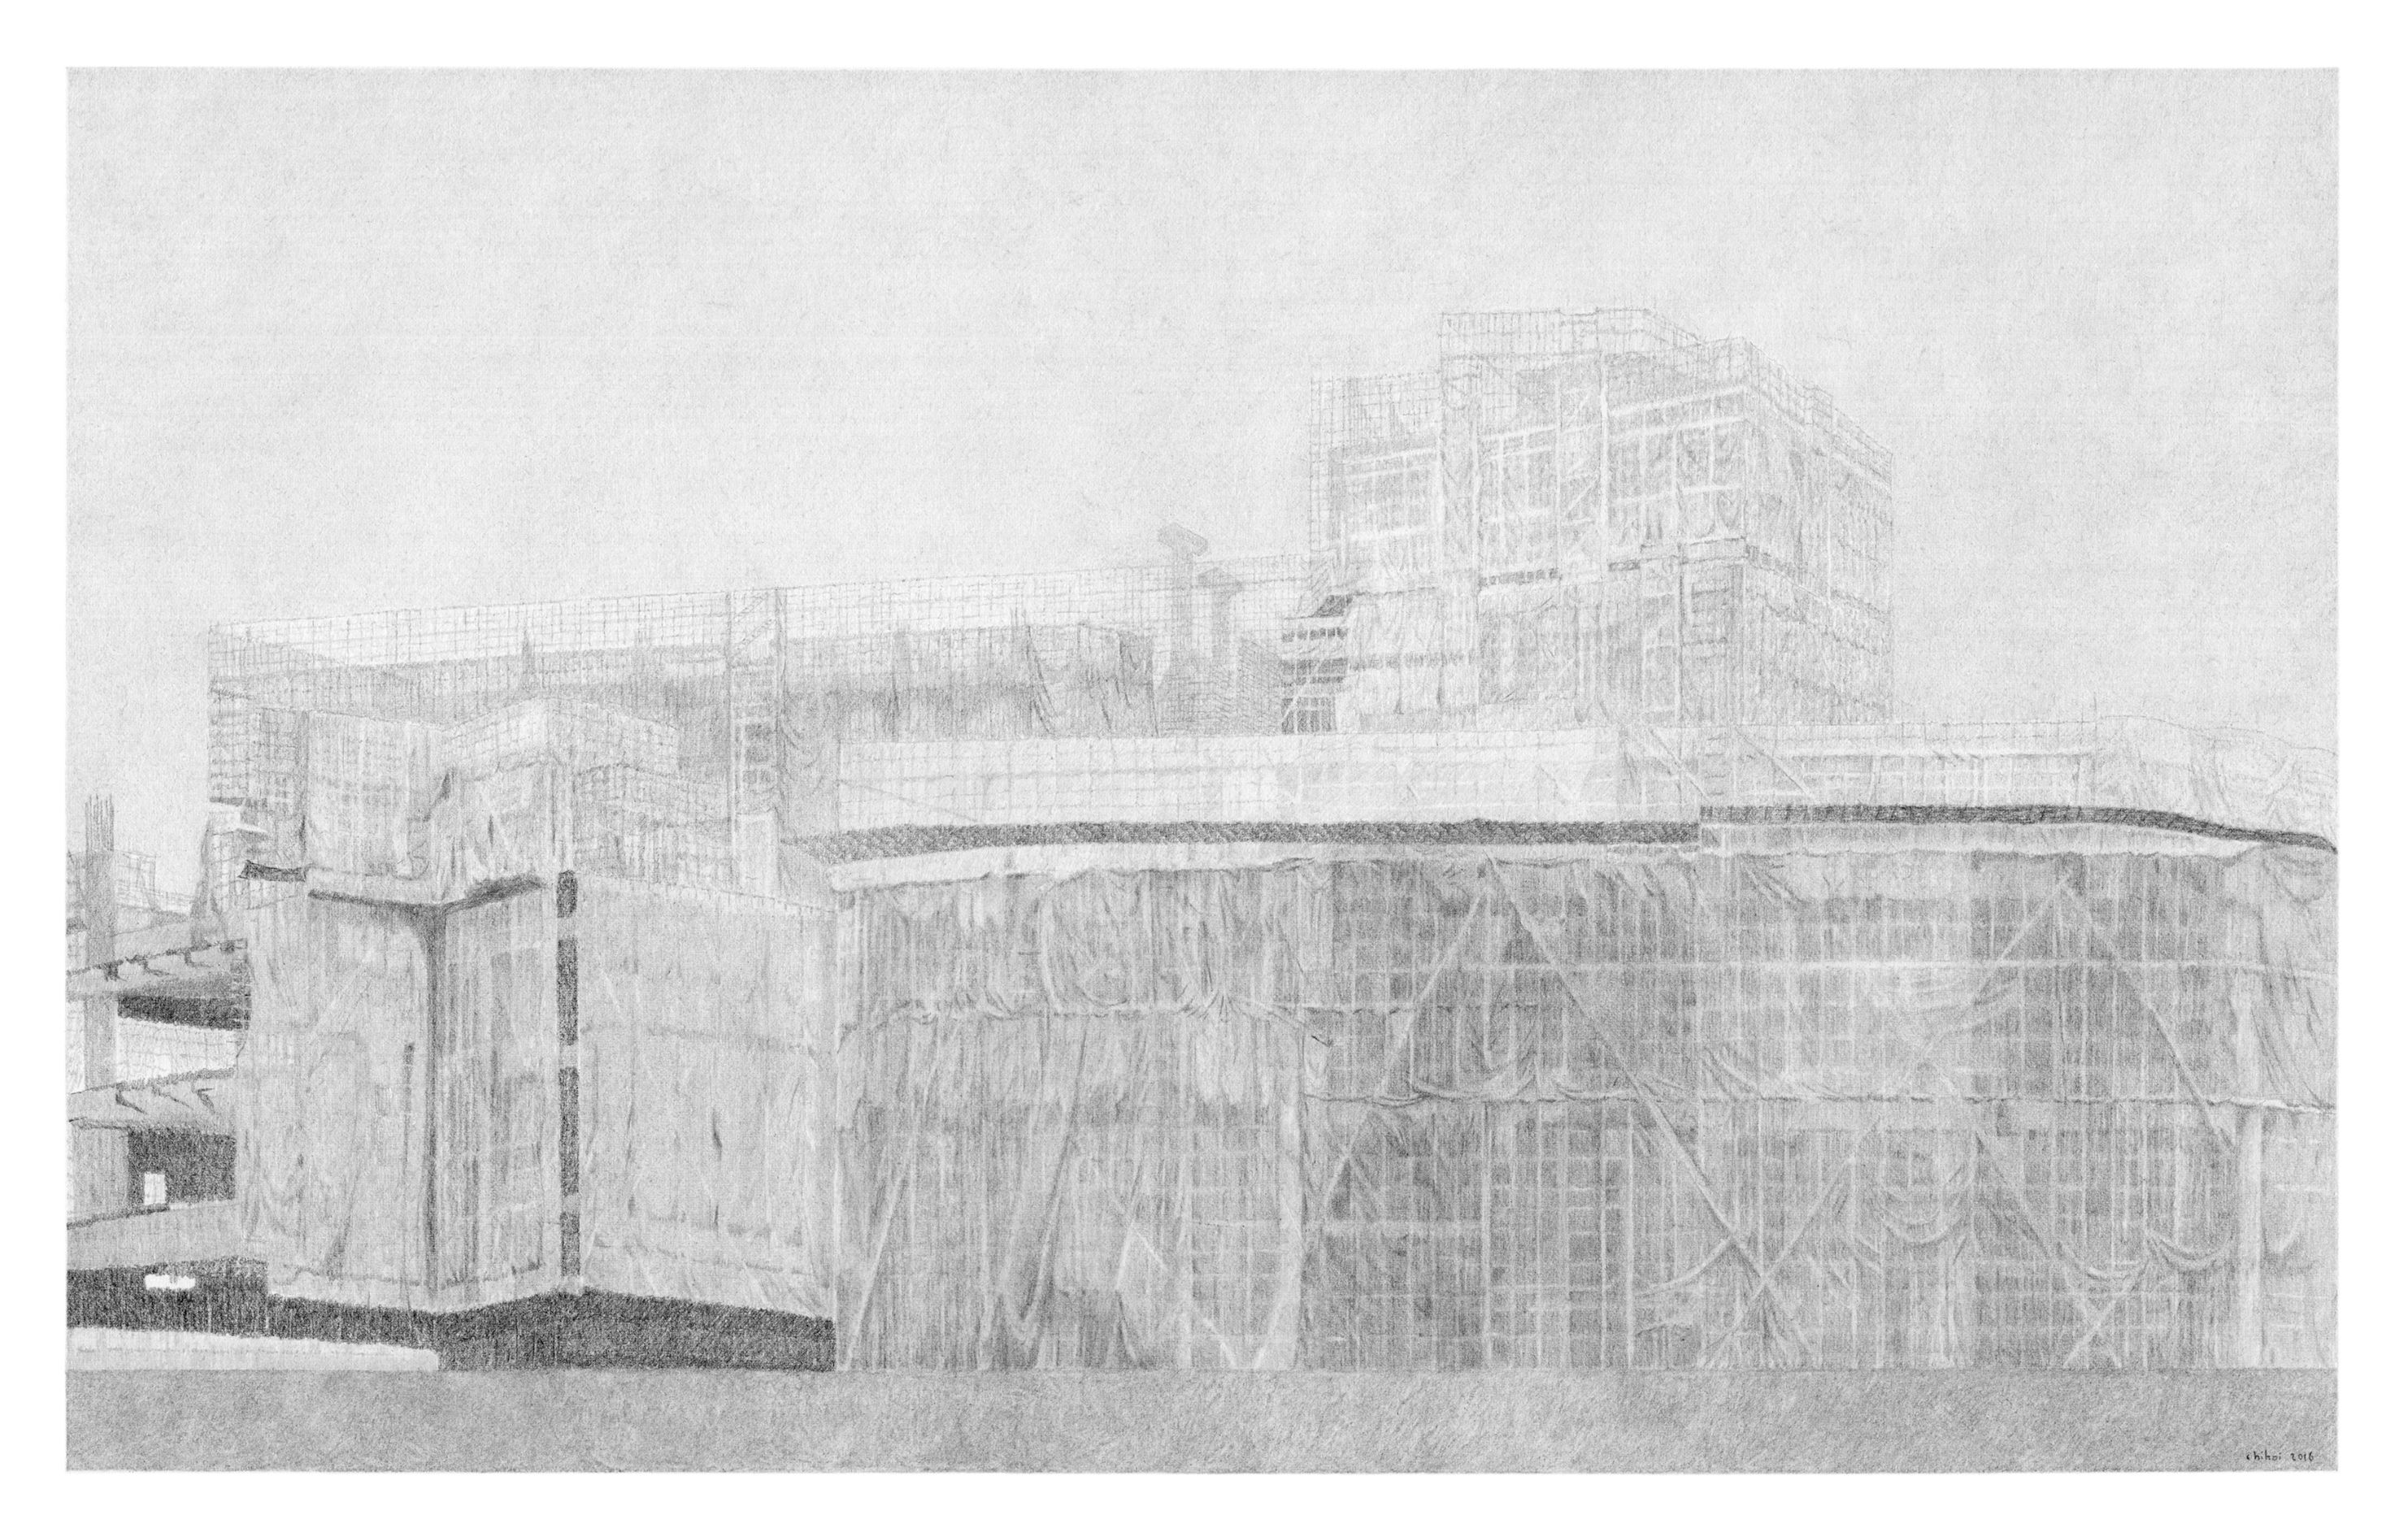 Chihoi│New World Center 2│2016｜35 x 55 cm｜pencil on paper